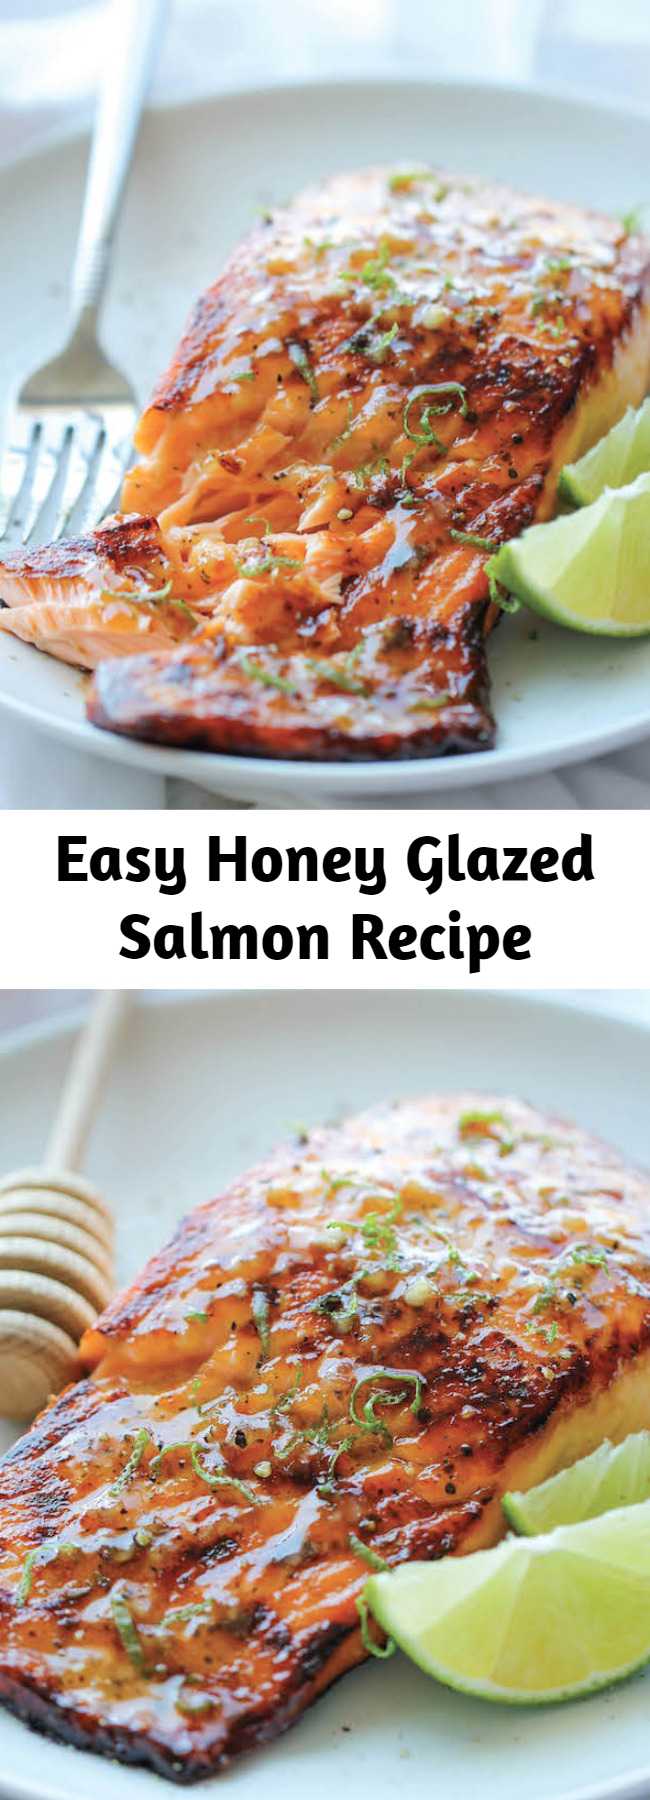 Easy Honey Glazed Salmon Recipe - The easiest, most flavorful salmon you will ever make. And that browned butter lime sauce is to die for!